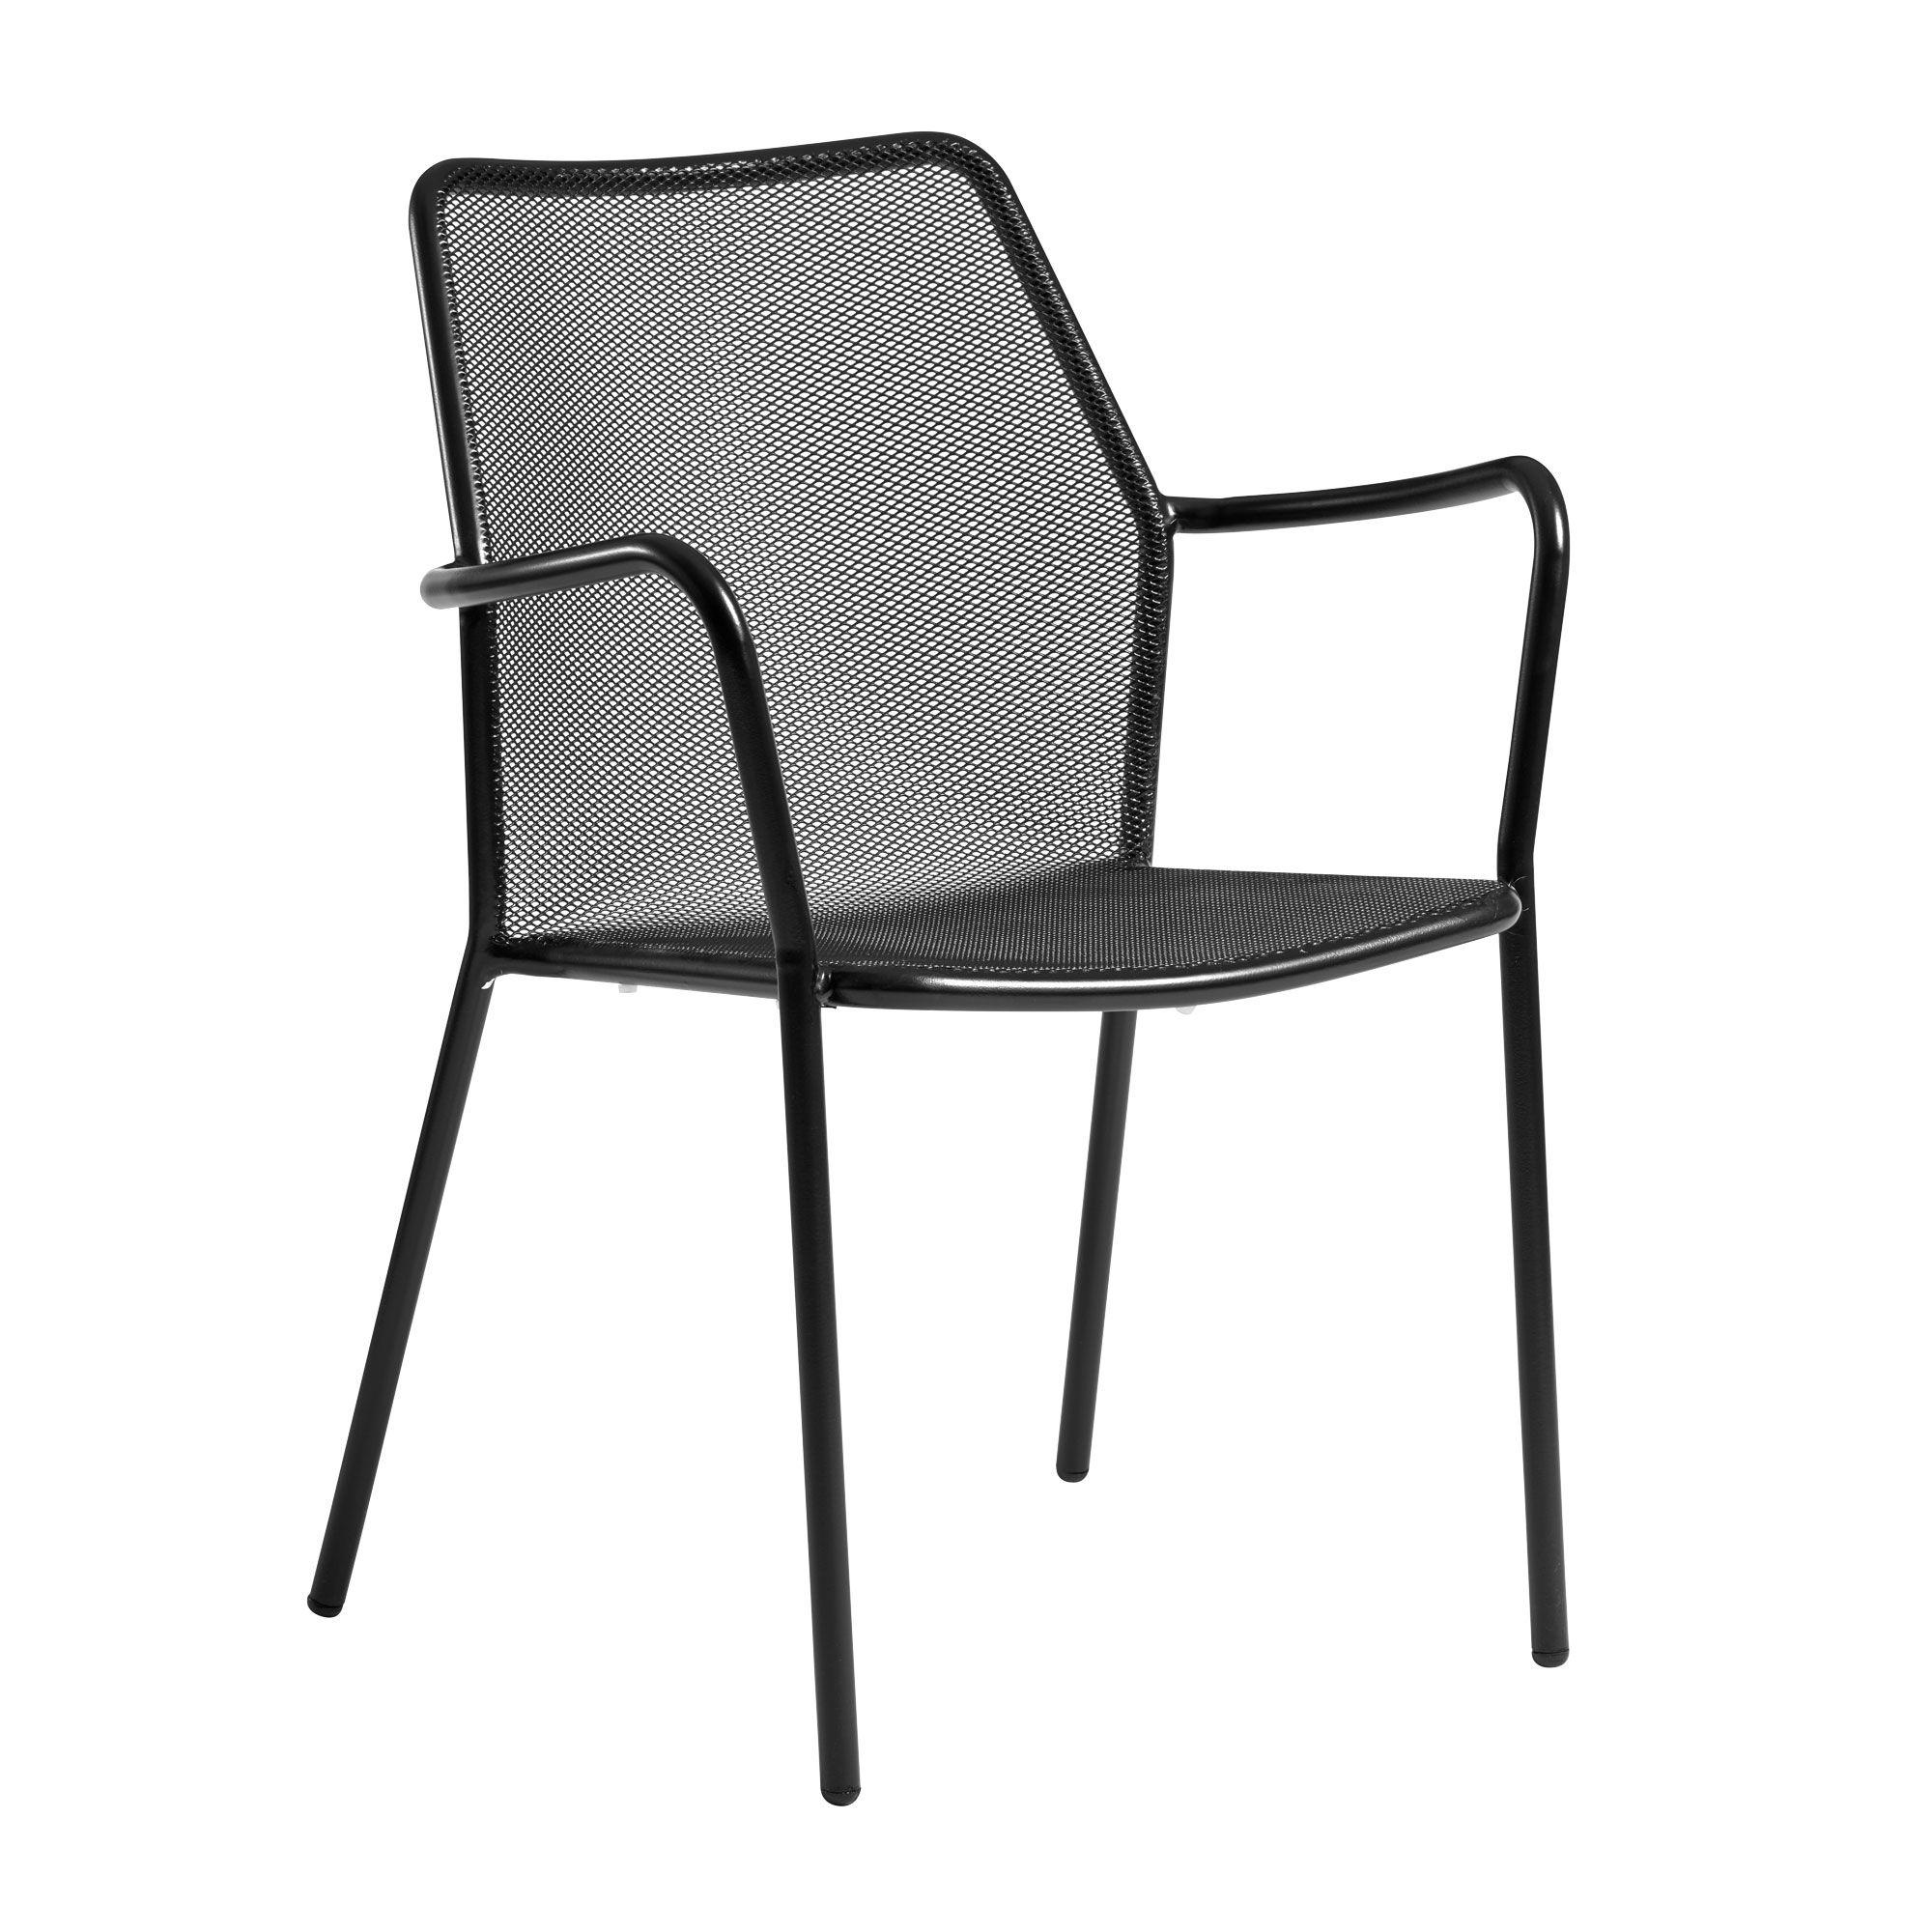 Black Nova Stackable Armchair for Indoor and Outdoor Use